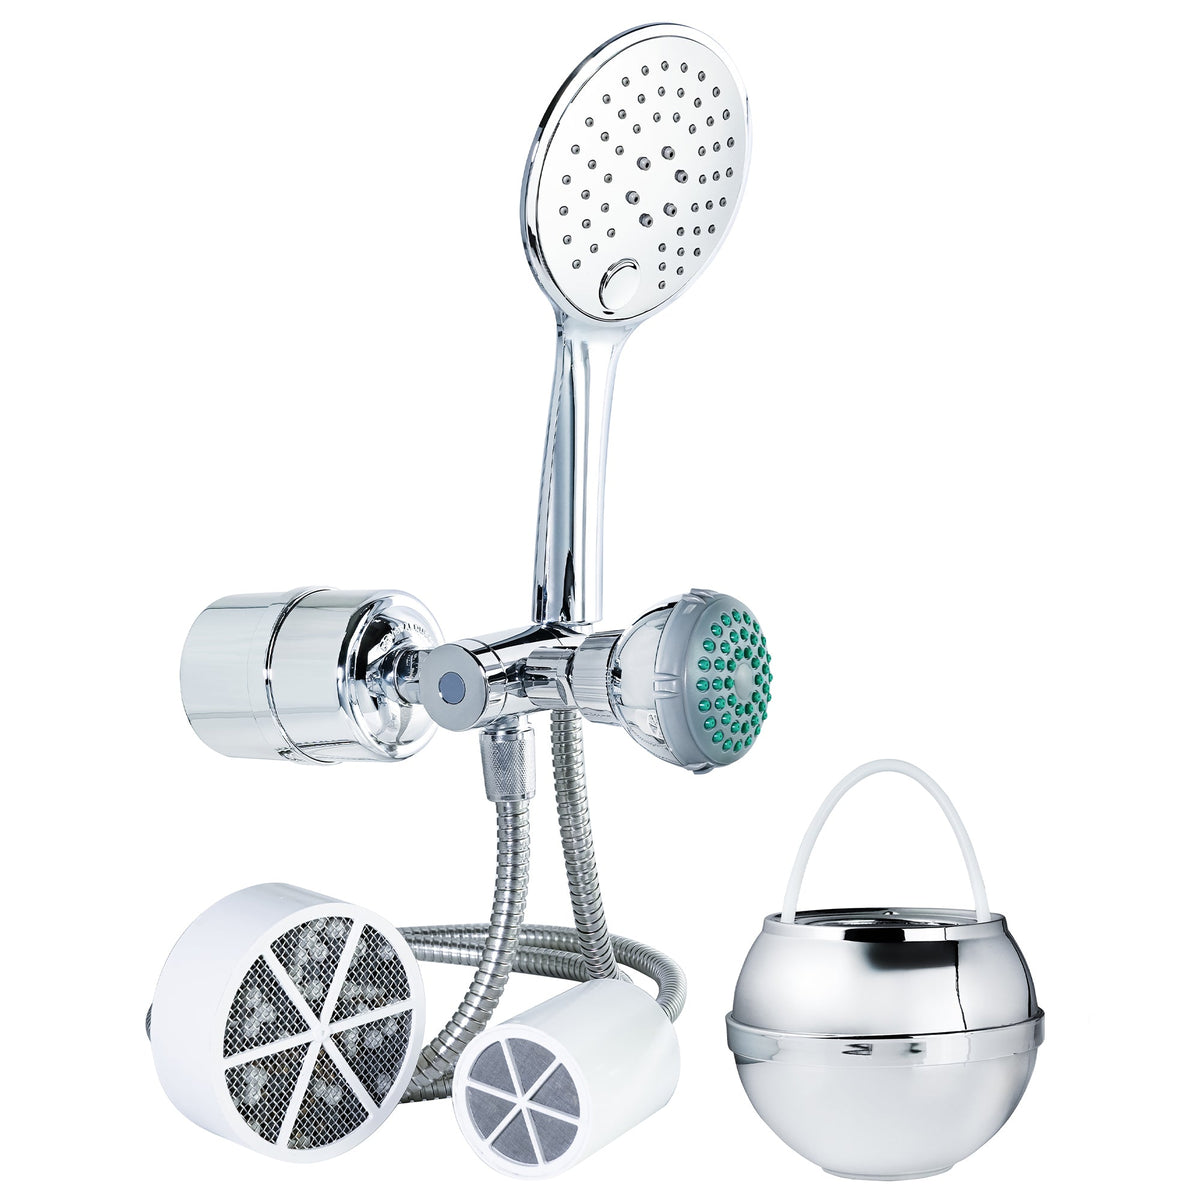 2-in-1 Combo Shower Filter and Bath Ball Bundle - - Crystal Quest Water Filters